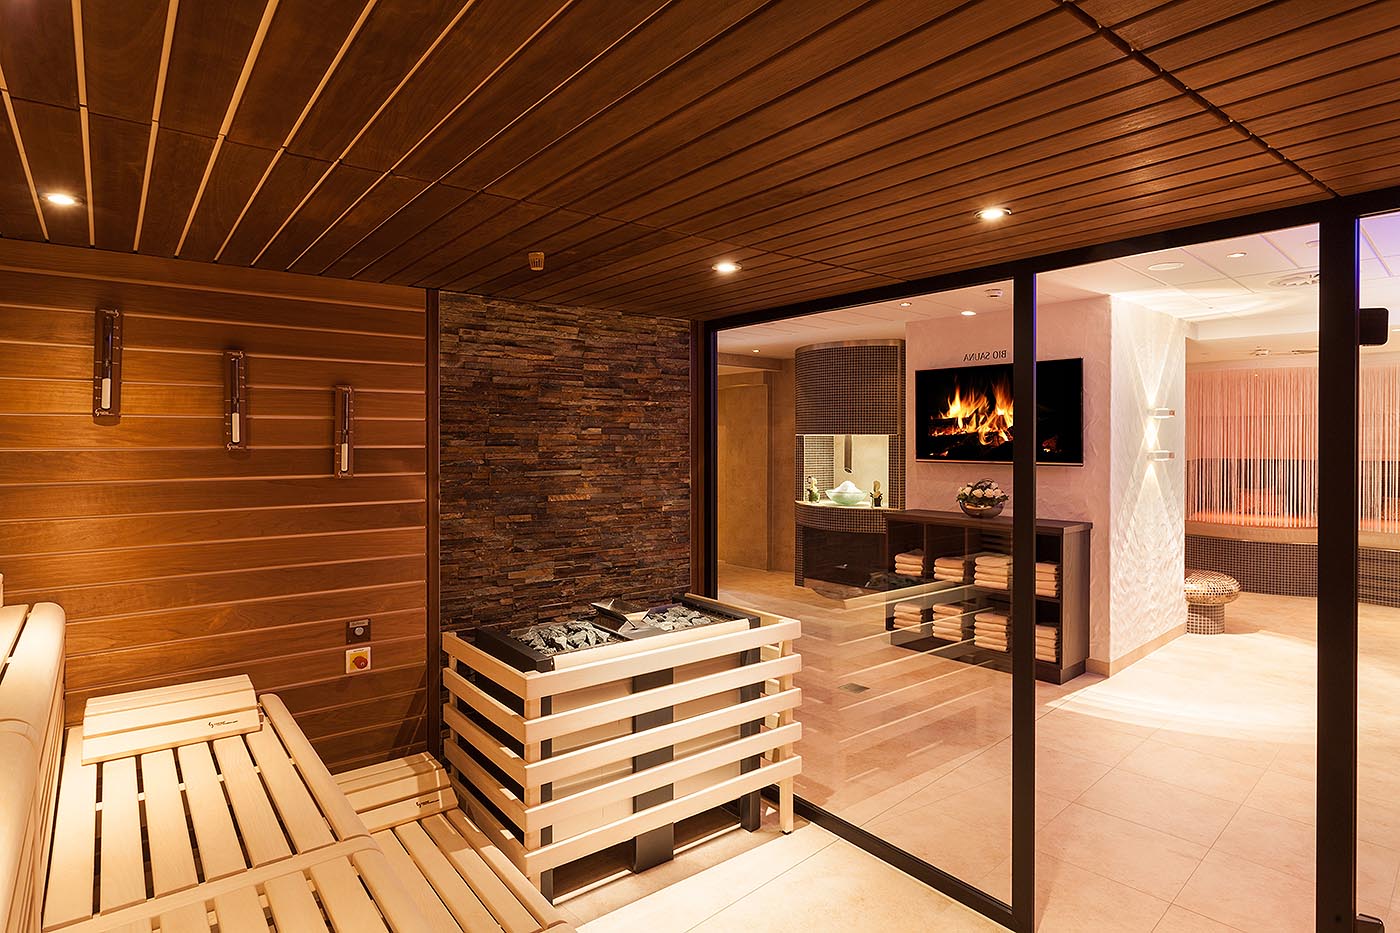 Wellness area with sauna at the Sauerland Stern Hotel: Bio sauna with glass front and large sauna oven for powerful infusions. made by corso sauna manufaktur